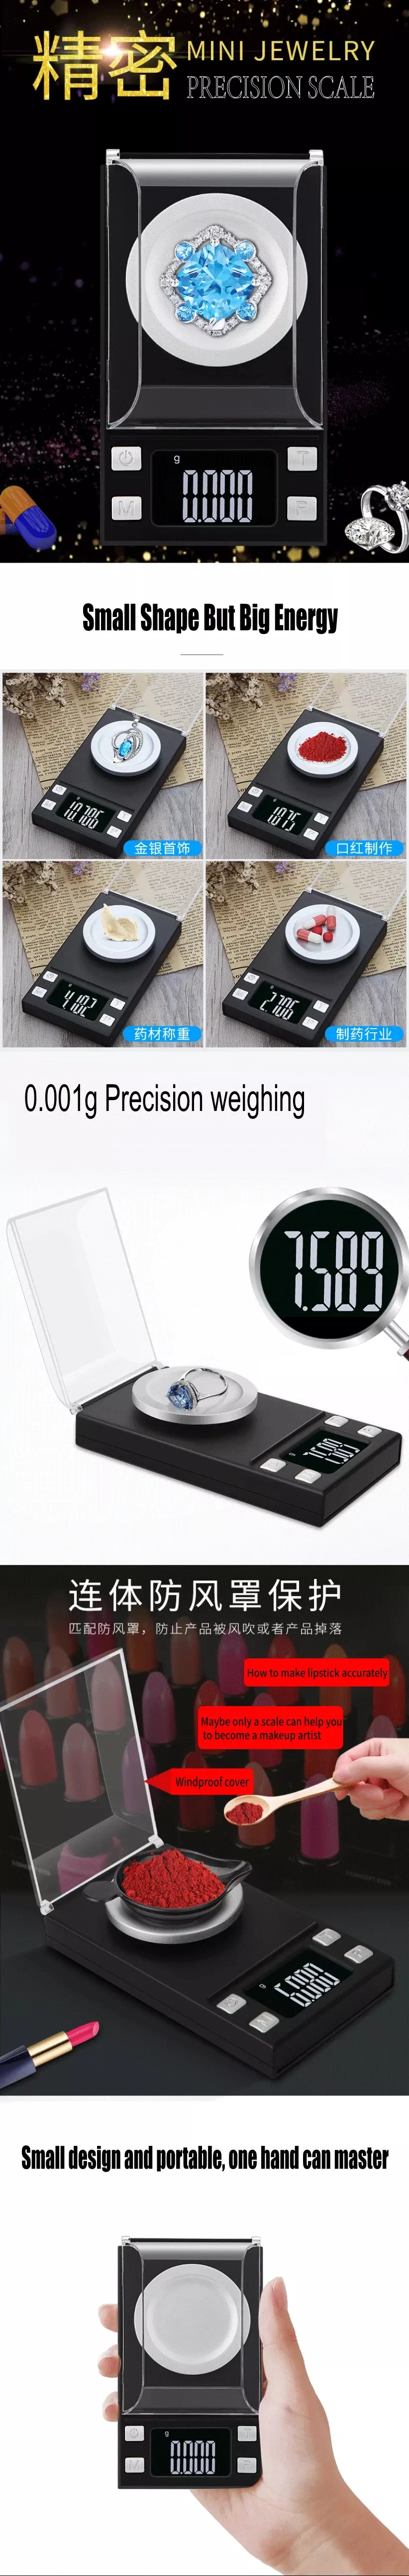 100g/50g/20g 0.001g Precision Scale For Jewelry Gold Herb Lab